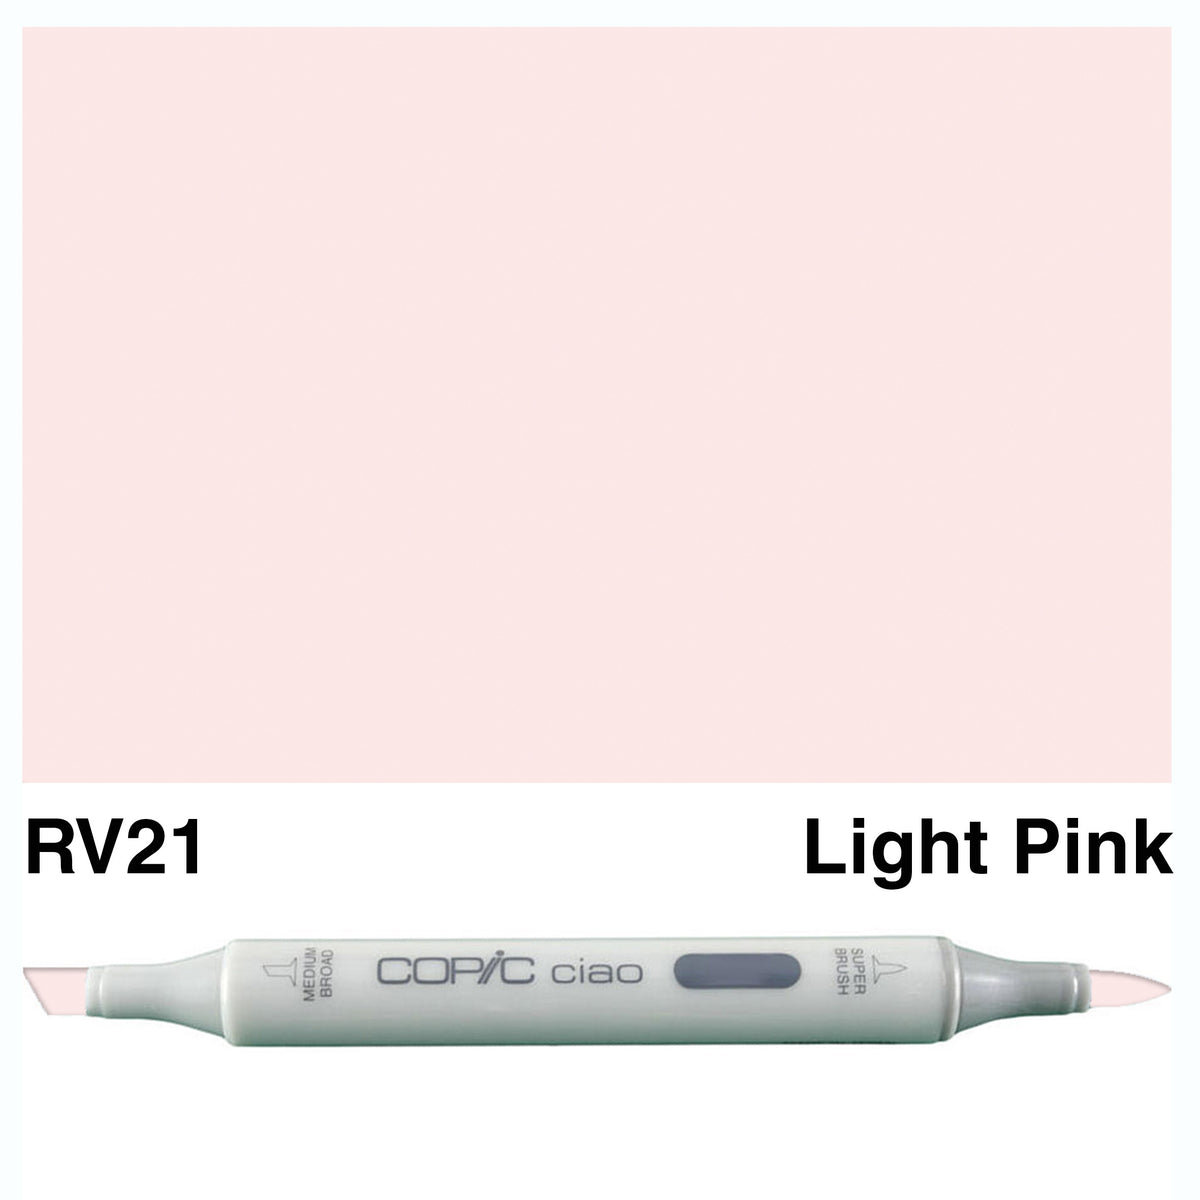 Copic Ciao RV21-Light Pink